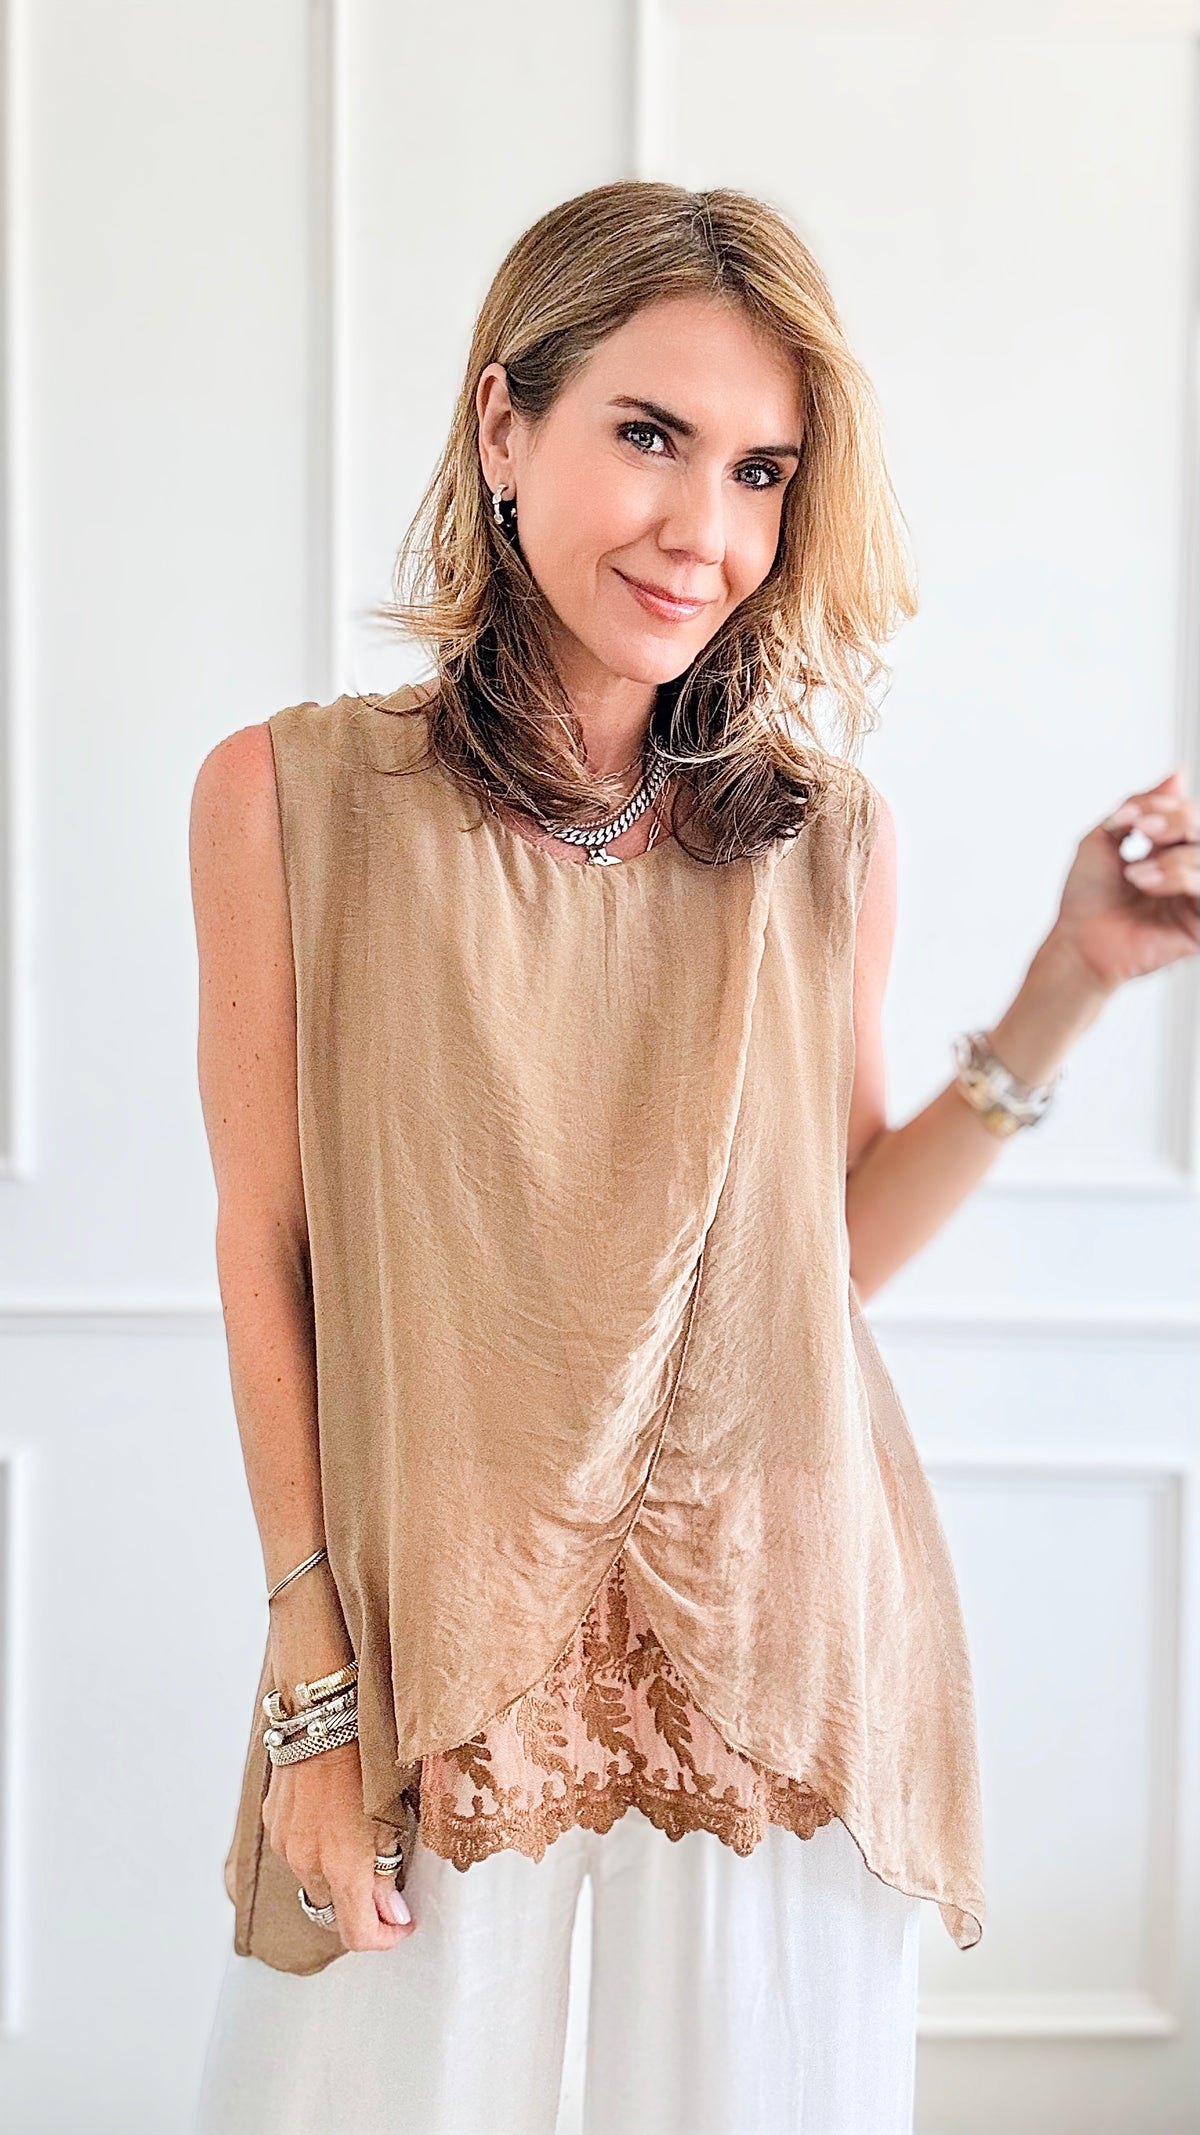 Sheer Sophistication Italian Top - Camel-110 Short Sleeve Tops-Germany-Coastal Bloom Boutique, find the trendiest versions of the popular styles and looks Located in Indialantic, FL